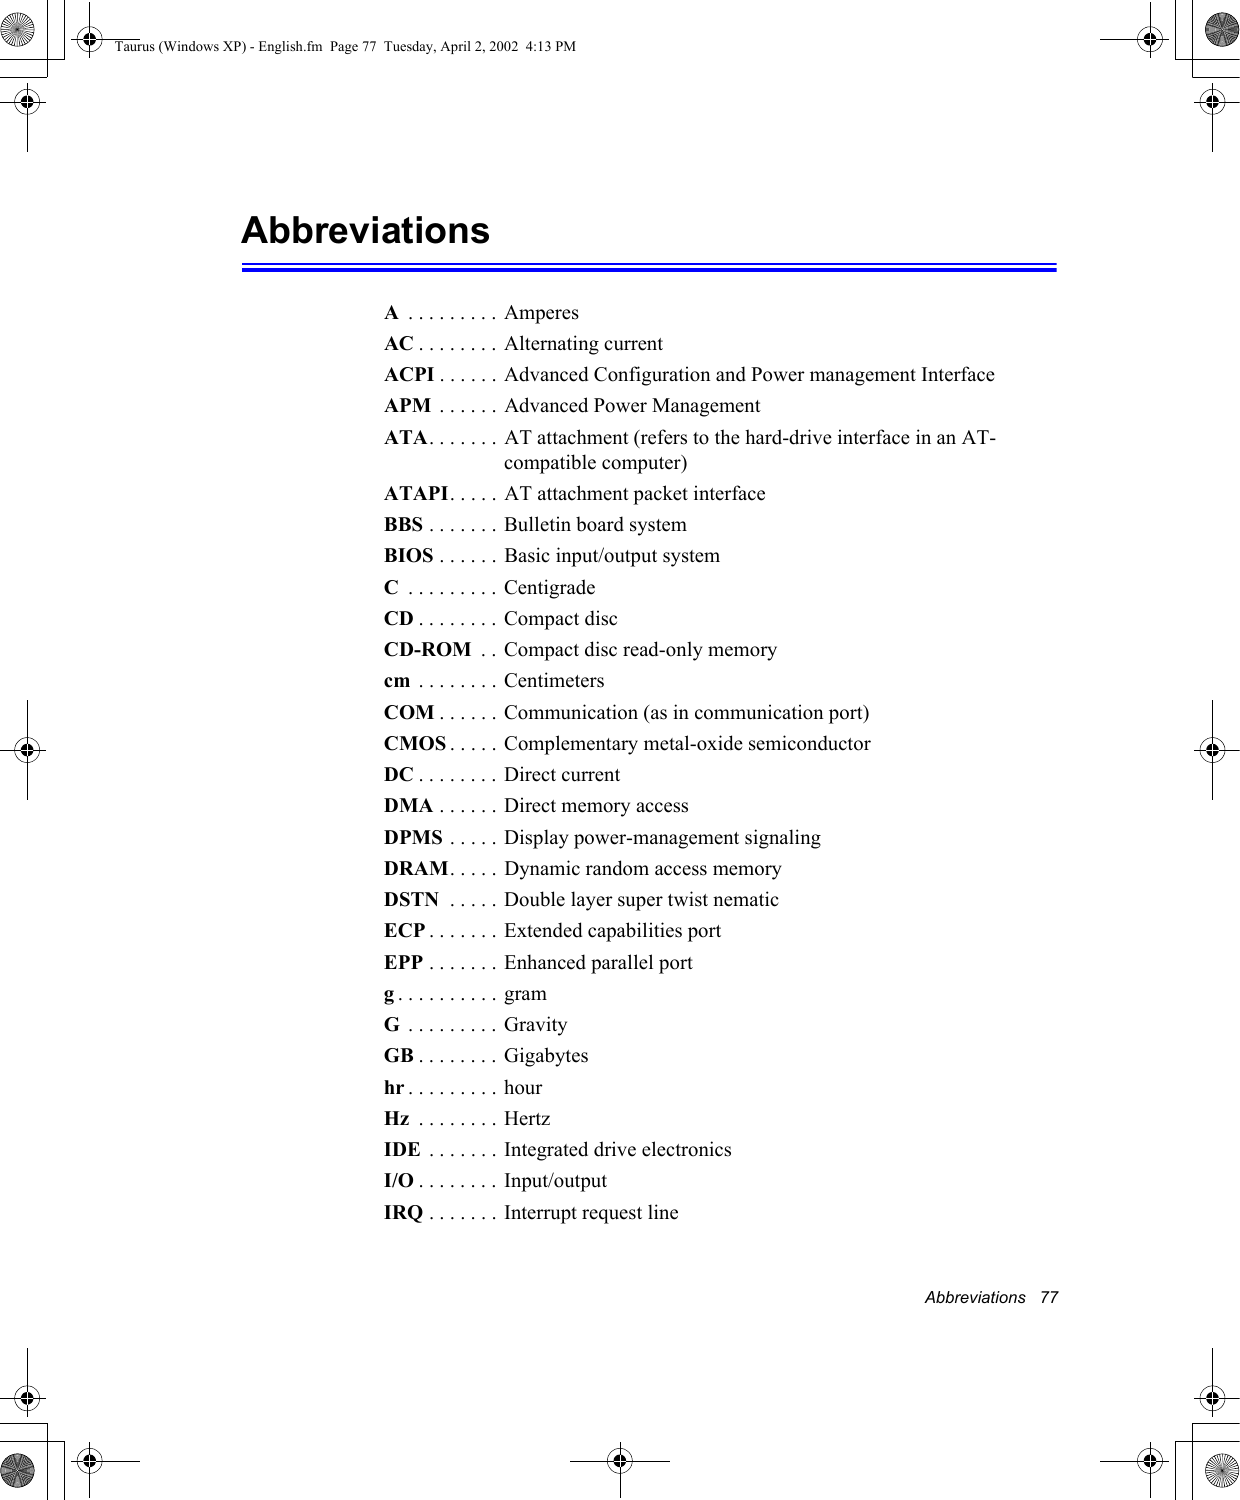 Abbreviations   77Abbreviations A . . . . . . . . . AmperesAC . . . . . . . . Alternating currentACPI . . . . . .  Advanced Configuration and Power management InterfaceAPM  . . . . . . Advanced Power ManagementATA. . . . . . . AT attachment (refers to the hard-drive interface in an AT-compatible computer)ATAPI. . . . . AT attachment packet interfaceBBS . . . . . . . Bulletin board systemBIOS . . . . . . Basic input/output systemC . . . . . . . . . CentigradeCD . . . . . . . .  Compact discCD-ROM  . . Compact disc read-only memorycm  . . . . . . . . CentimetersCOM . . . . . . Communication (as in communication port)CMOS . . . . . Complementary metal-oxide semiconductorDC . . . . . . . .  Direct currentDMA . . . . . . Direct memory accessDPMS . . . . . Display power-management signalingDRAM. . . . . Dynamic random access memoryDSTN  . . . . . Double layer super twist nematicECP . . . . . . . Extended capabilities portEPP . . . . . . . Enhanced parallel portg. . . . . . . . . . gramG . . . . . . . . . GravityGB . . . . . . . .  Gigabyteshr . . . . . . . . . hourHz  . . . . . . . . HertzIDE  . . . . . . . Integrated drive electronics I/O . . . . . . . . Input/outputIRQ . . . . . . .  Interrupt request lineTaurus (Windows XP) - English.fm  Page 77  Tuesday, April 2, 2002  4:13 PM